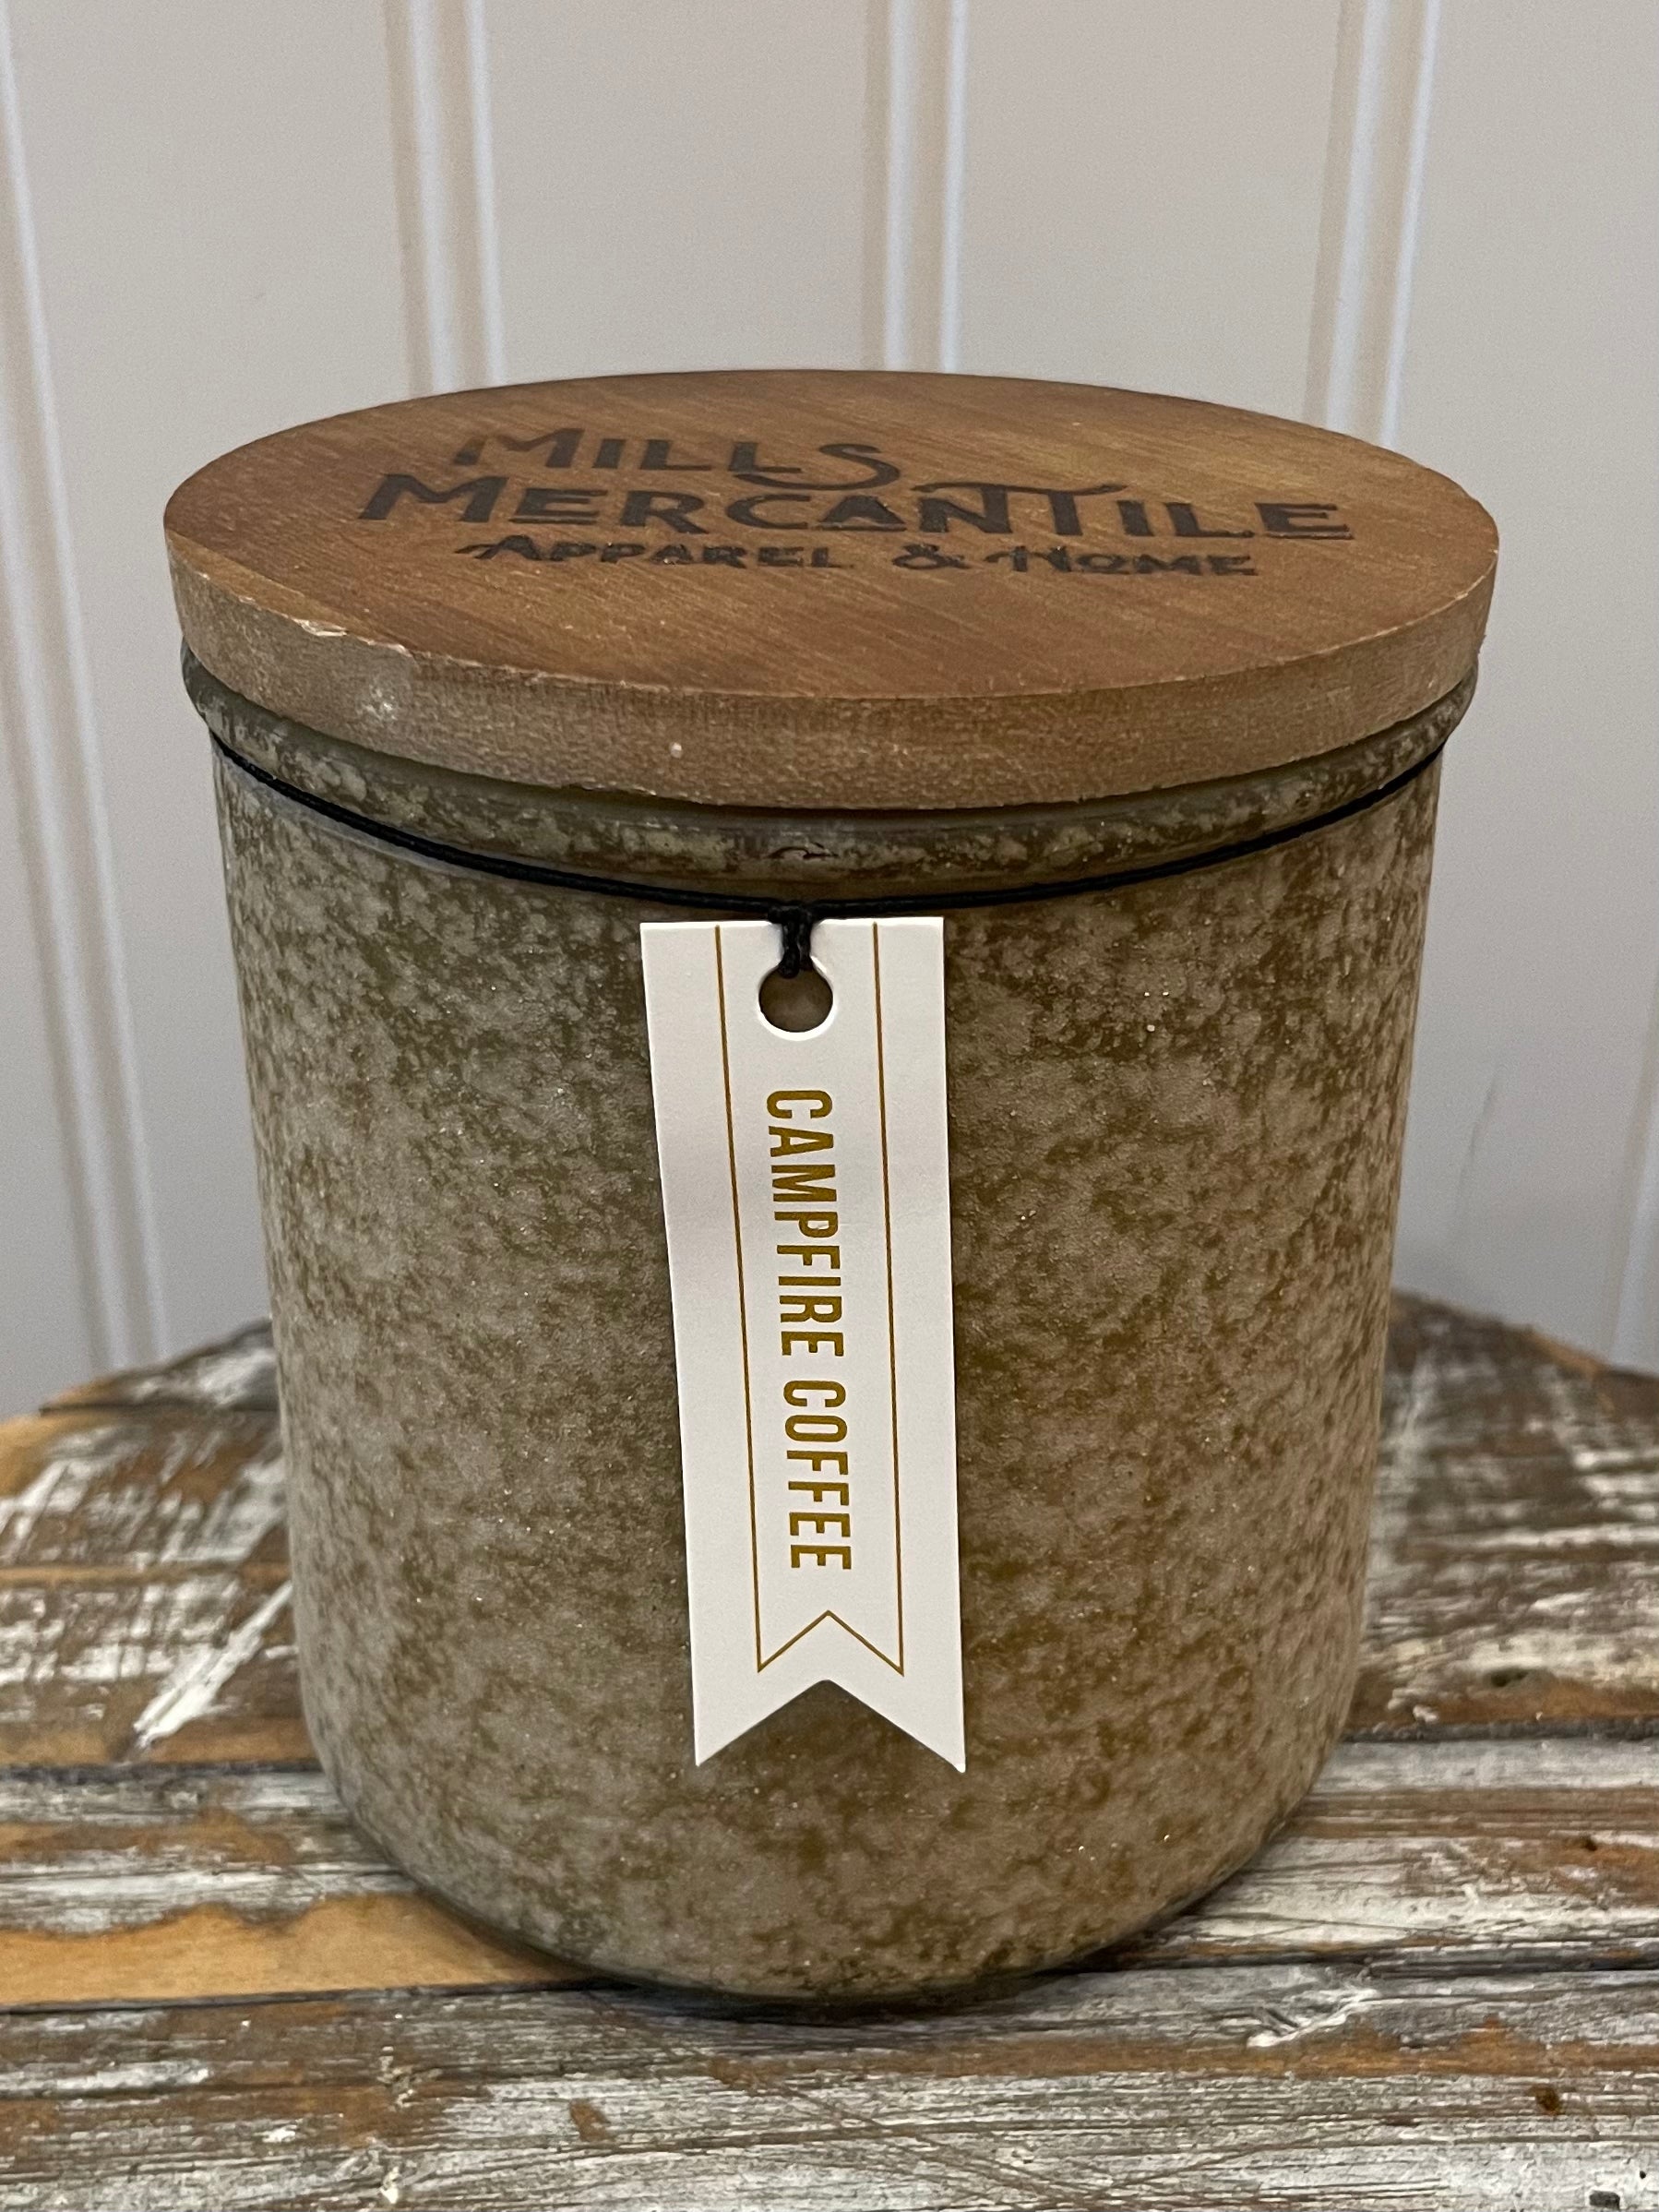 Mills Mercantile Candle - Campfire Coffee Scent